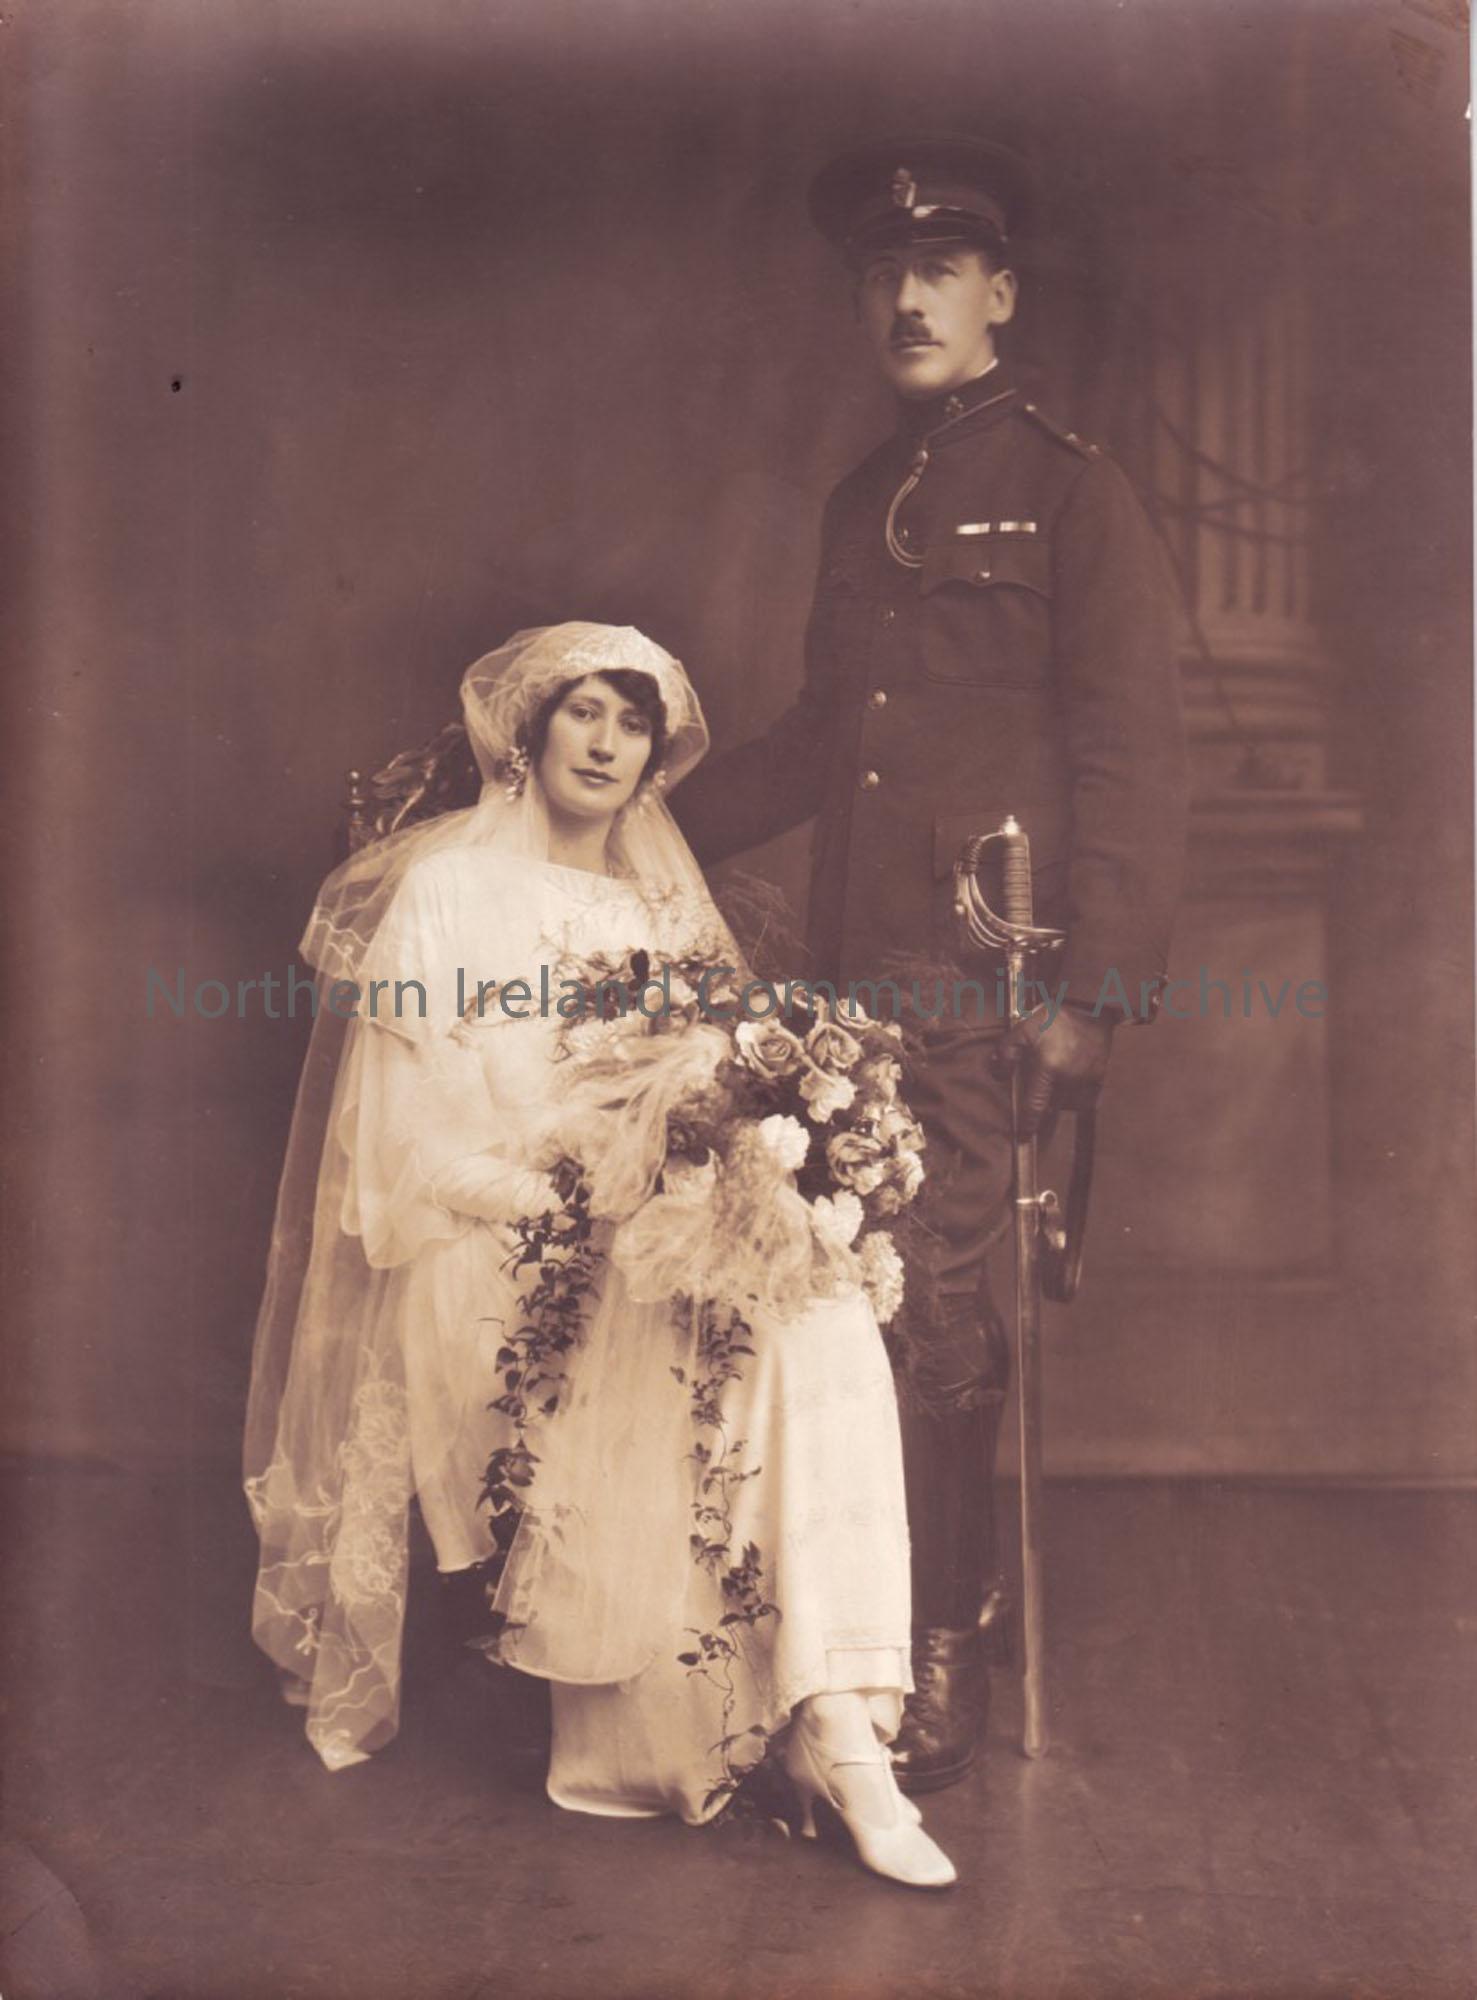 Photograph of Robert Bertie Thomson & Louise on their wedding day.